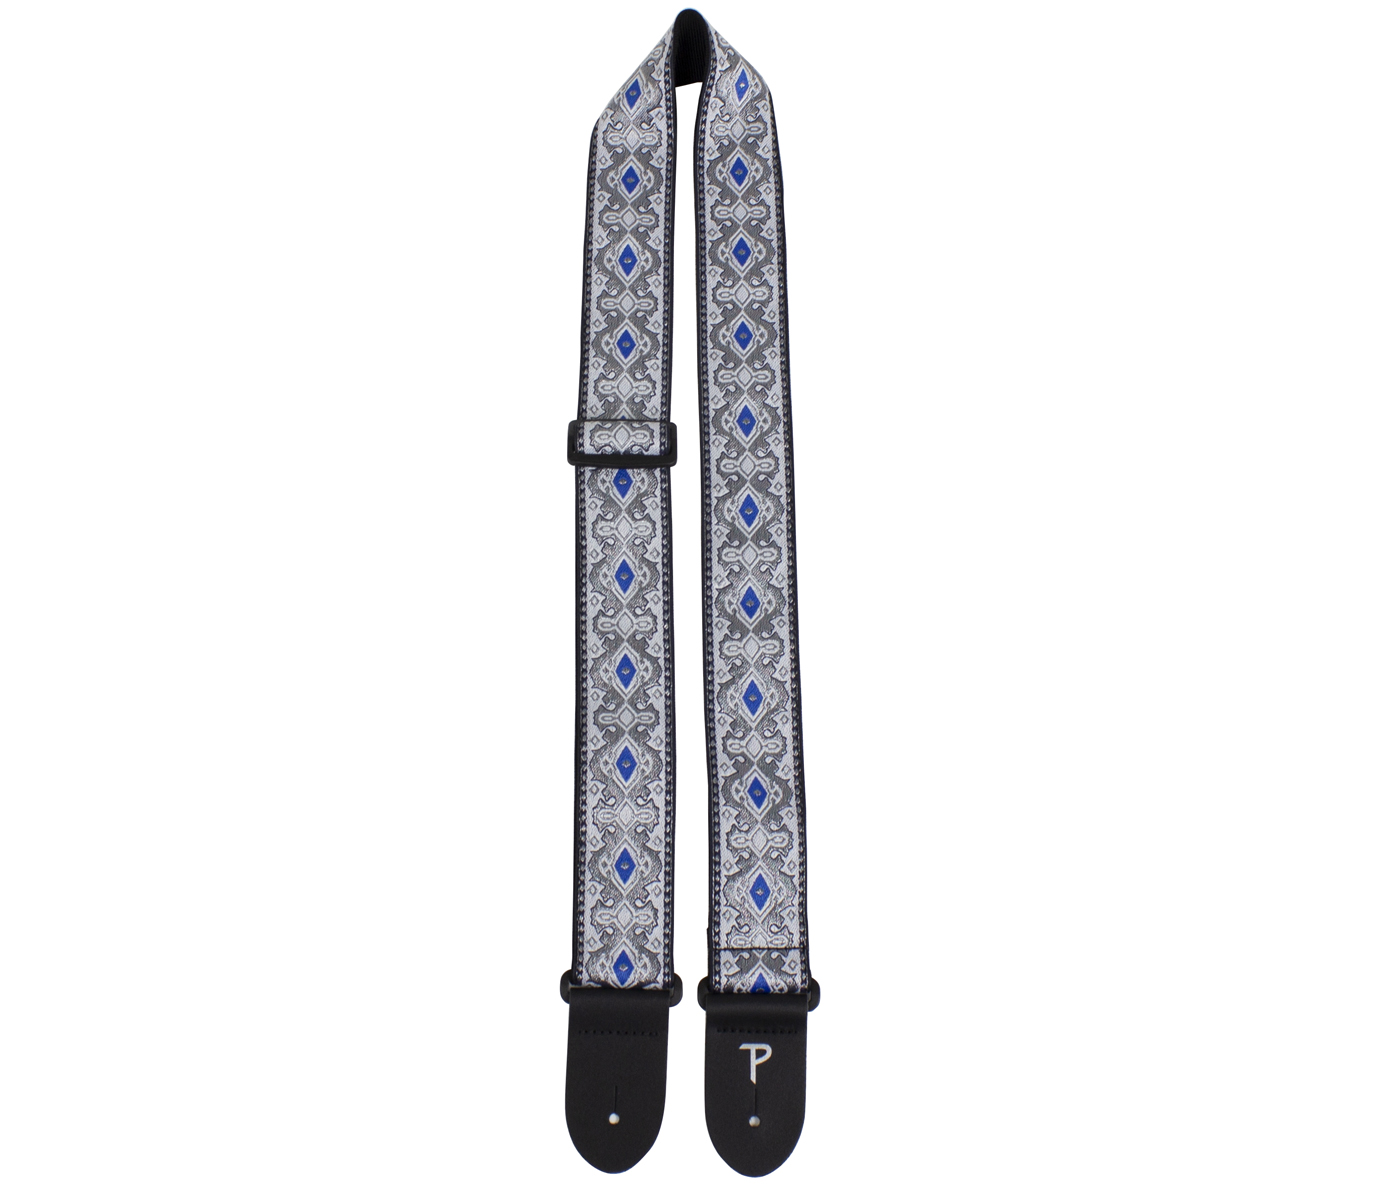 Wide Black and White Perris Guitar Strap Jacquard Guitar Strap to 58 in. Elite Strap with Genuine Leather Ends Adjustable Length 39 in Perri’s Leathers Ltd TWS-67240 2 in 